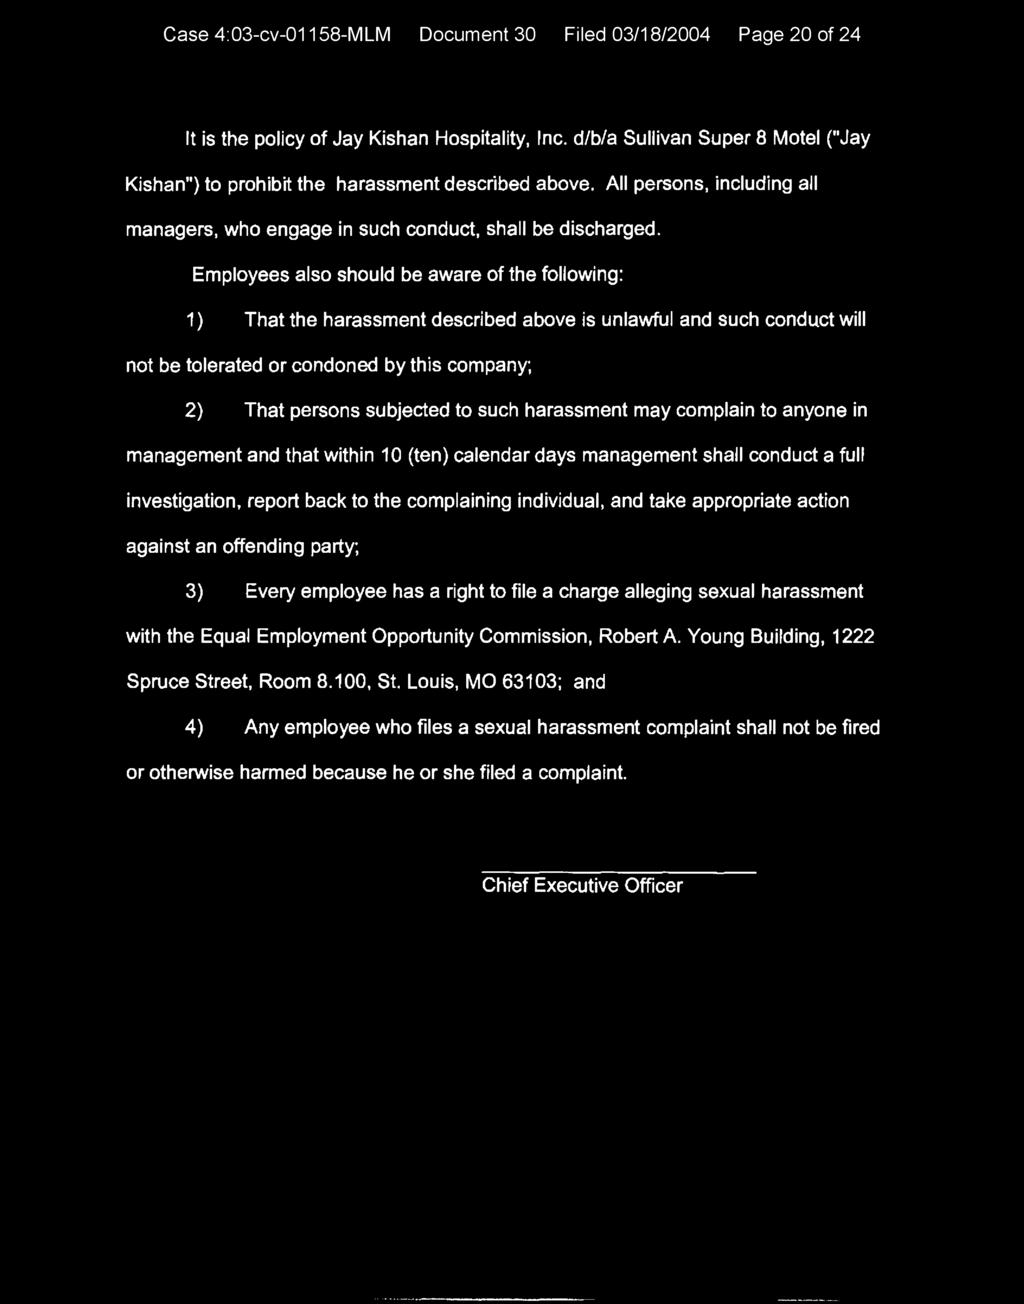 Case 4:03-cv-01158-MLM Document 30 Filed 03/18/2004 Page 20 of 24 It is the policy of Jay Kishan Hospitality, Inc.